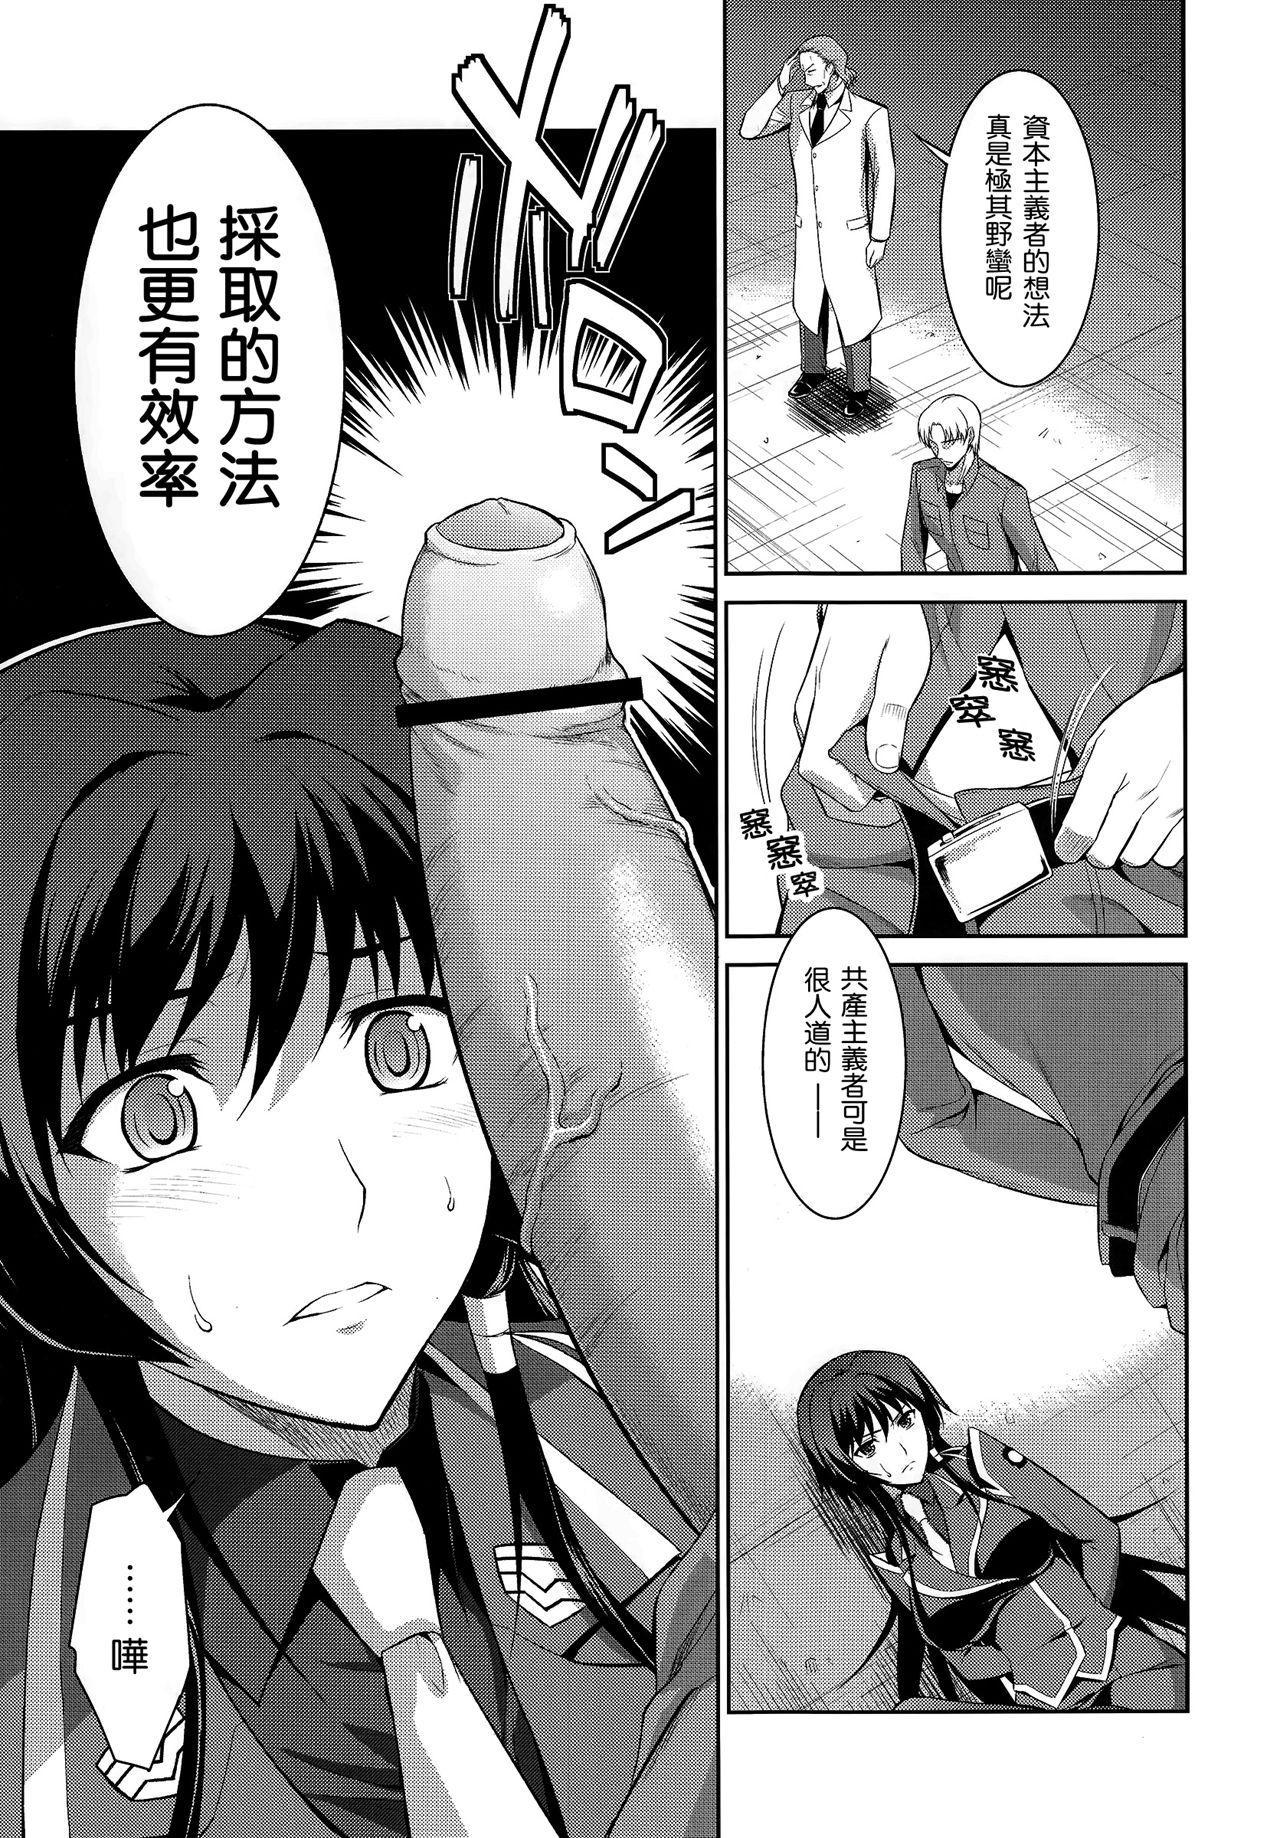 Oldyoung Ouka Chiru! - Muv luv alternative total eclipse Gay Cut - Page 7